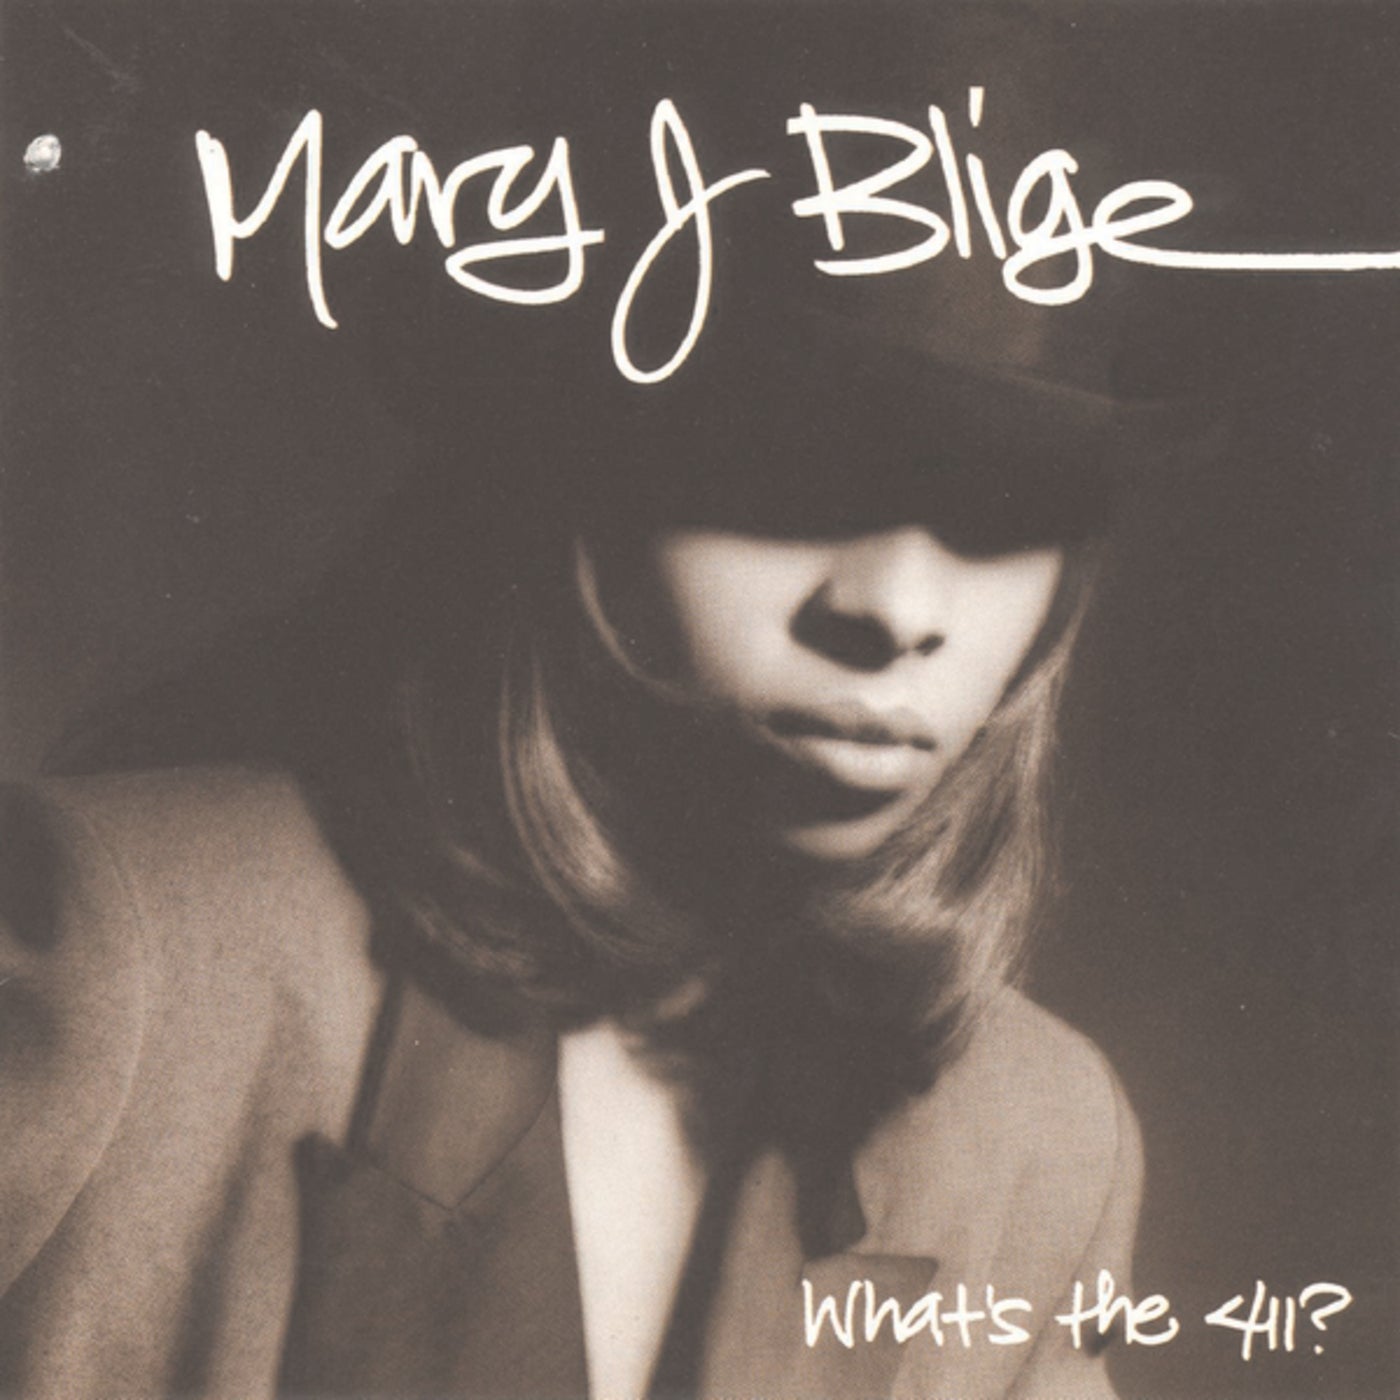 mary j blige be without you acapella